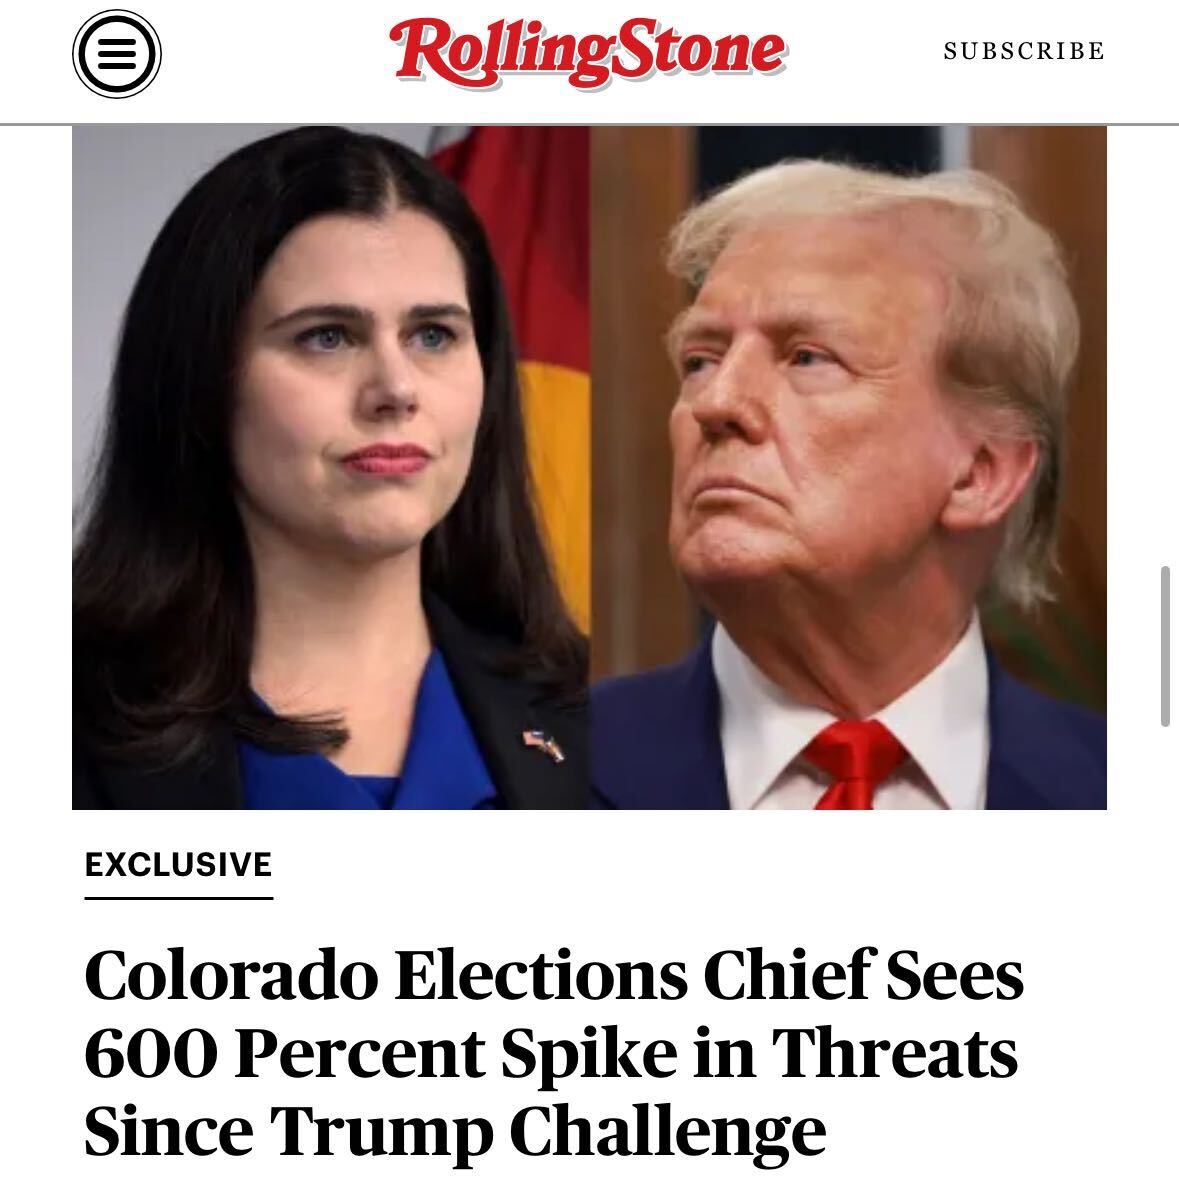 EXCLUSIVE: Jena Griswold supported the Colorado lawsuit to throw Trump off the ballot. Since then, she’s experienced a 600 percent increase in serious threats, according to data her office provided to us. Story: rollingstone.com/politics/polit…